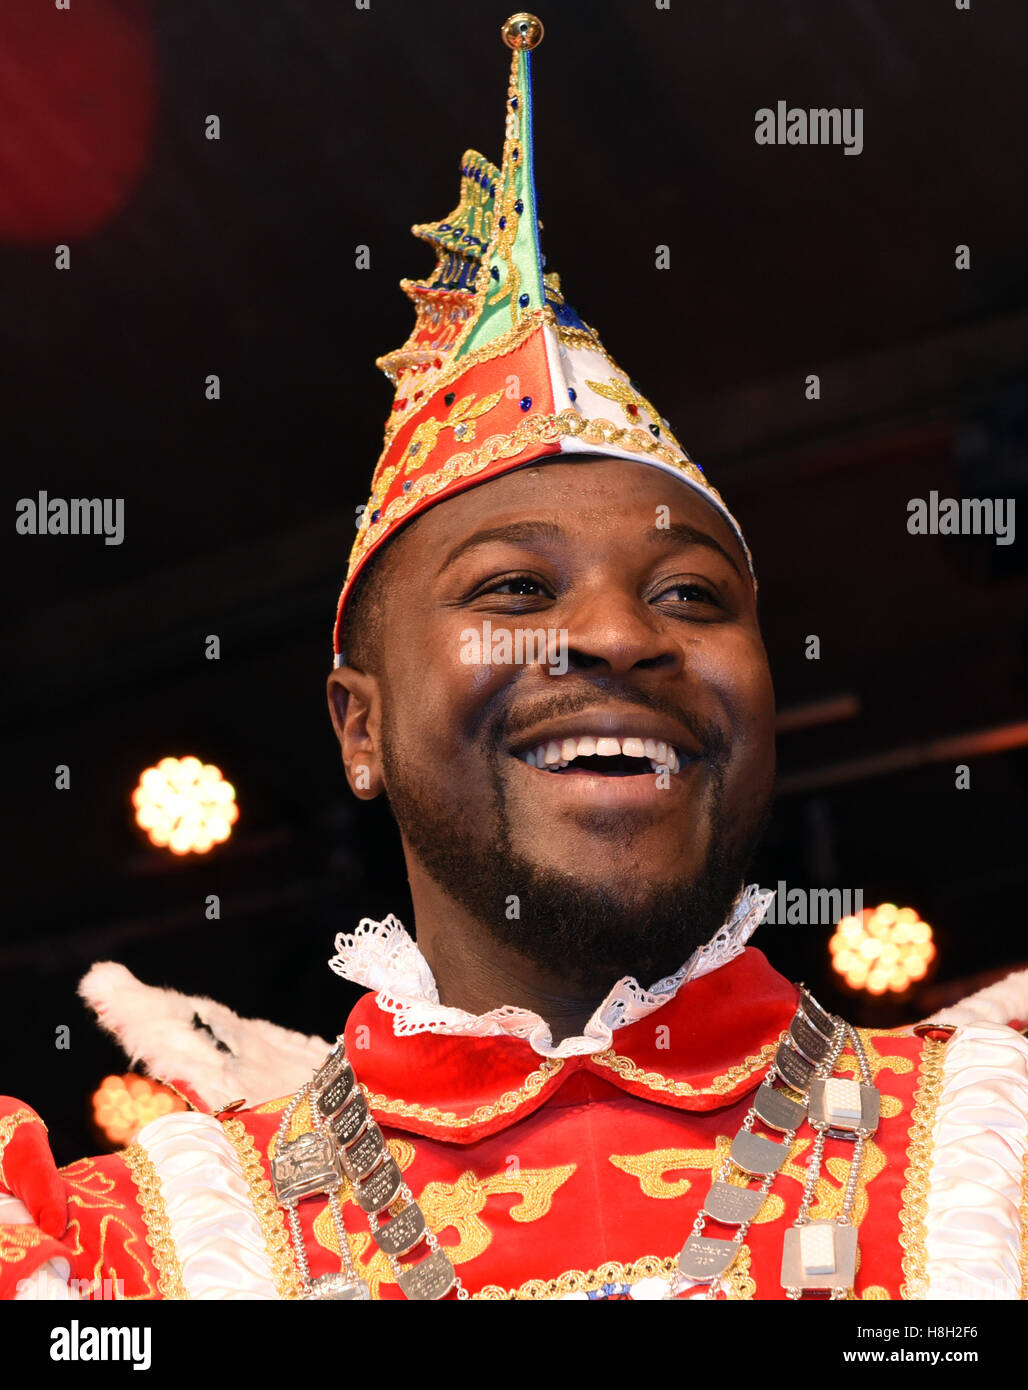 Ratingen, Germany. 12th Nov, 2016. The Carneval's prince Samuel Awasum, Prince Samuel I. of Ratingen stands before the official election in the city hall of Ratingen, Germany, 12 November 2016. Both people have Cameroonian ancestry. Photo: Horst Ossinger/dpa/Alamy Live News Stock Photo